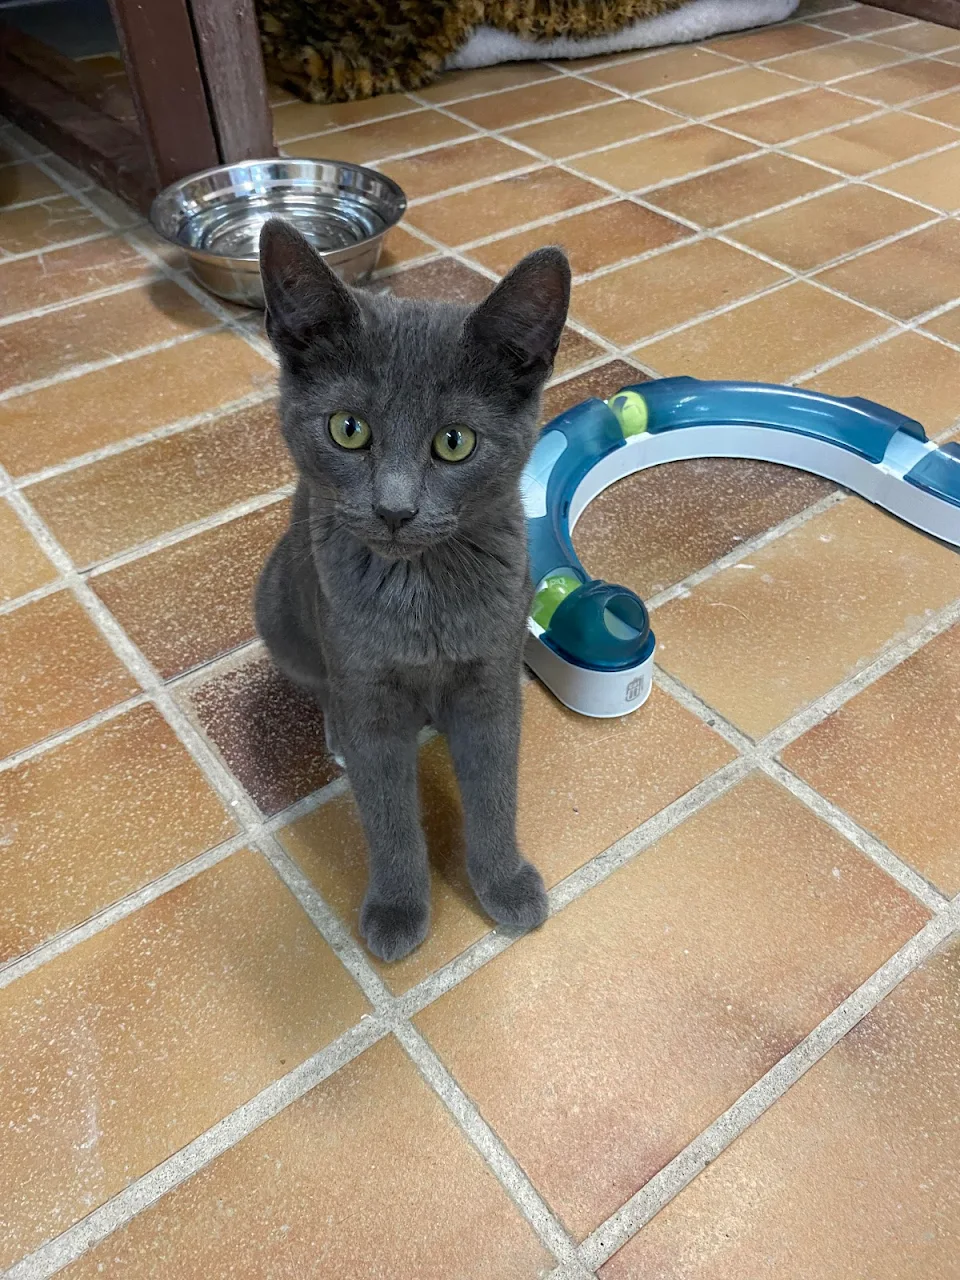 This is Hans a kitten at our cat shelter. He’s really fast but he took a one second pause so I could take his picture. Then ran to play with the others. :)